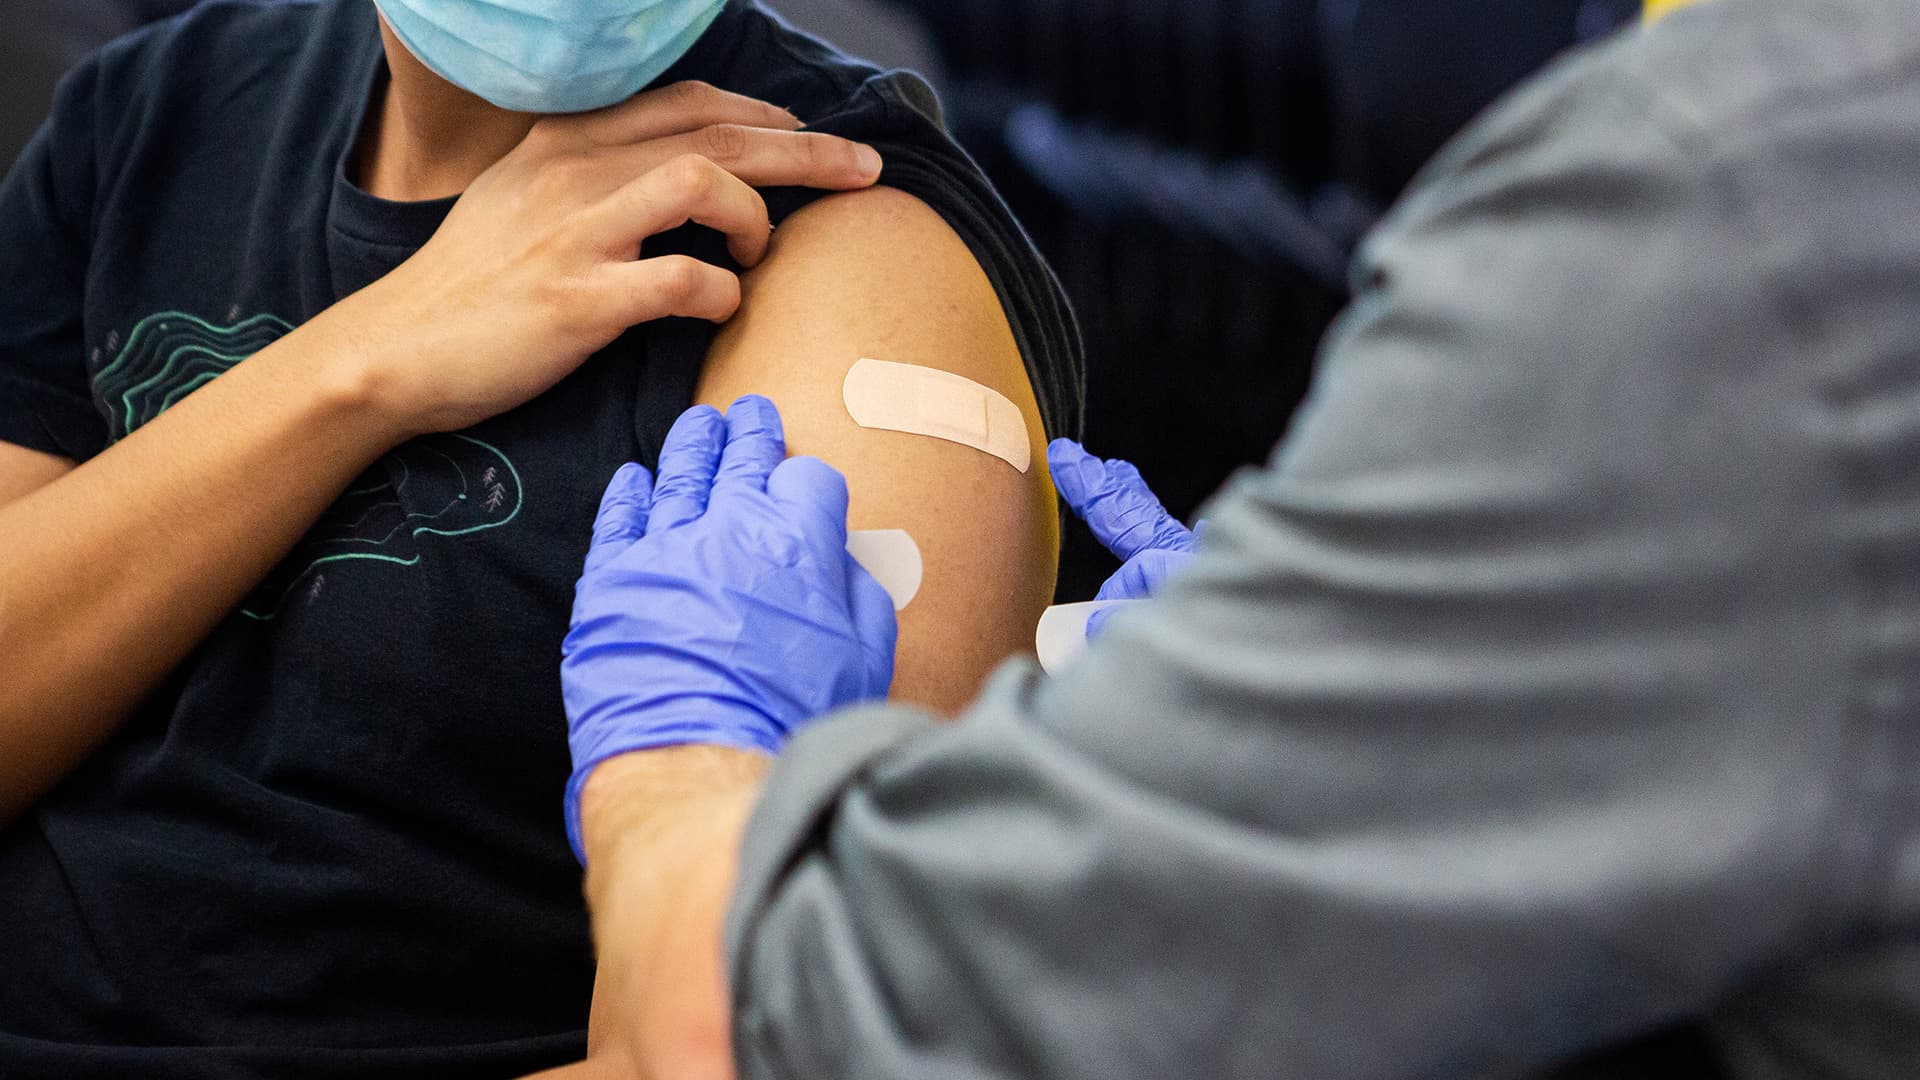 terp at vaccine clinic gets bandage on arm after shot